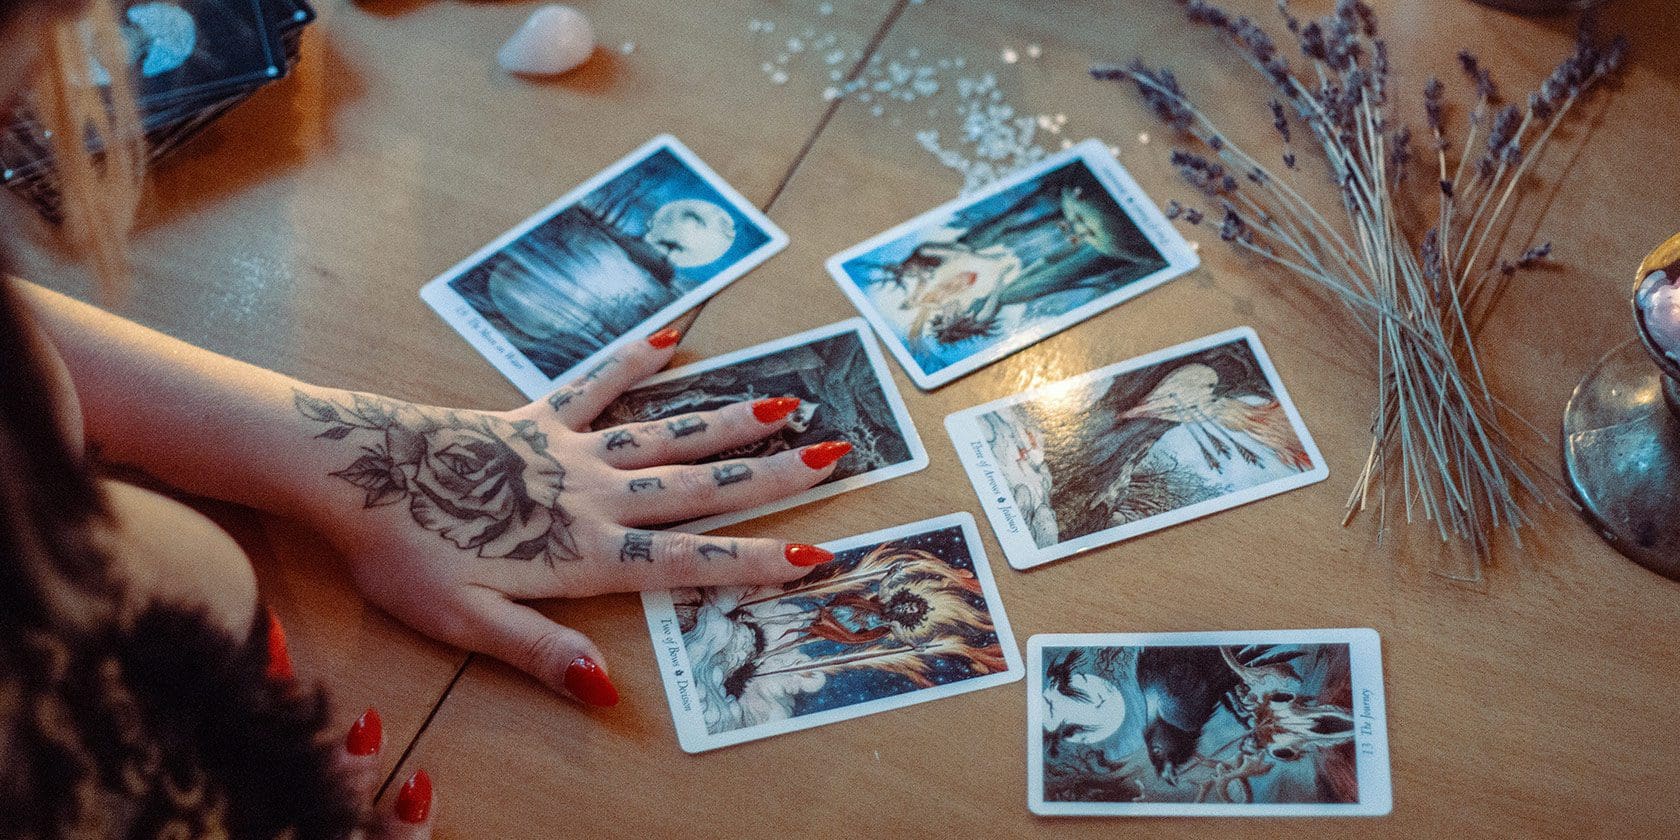 A person with tattoos on their arm is holding onto some tarot cards.